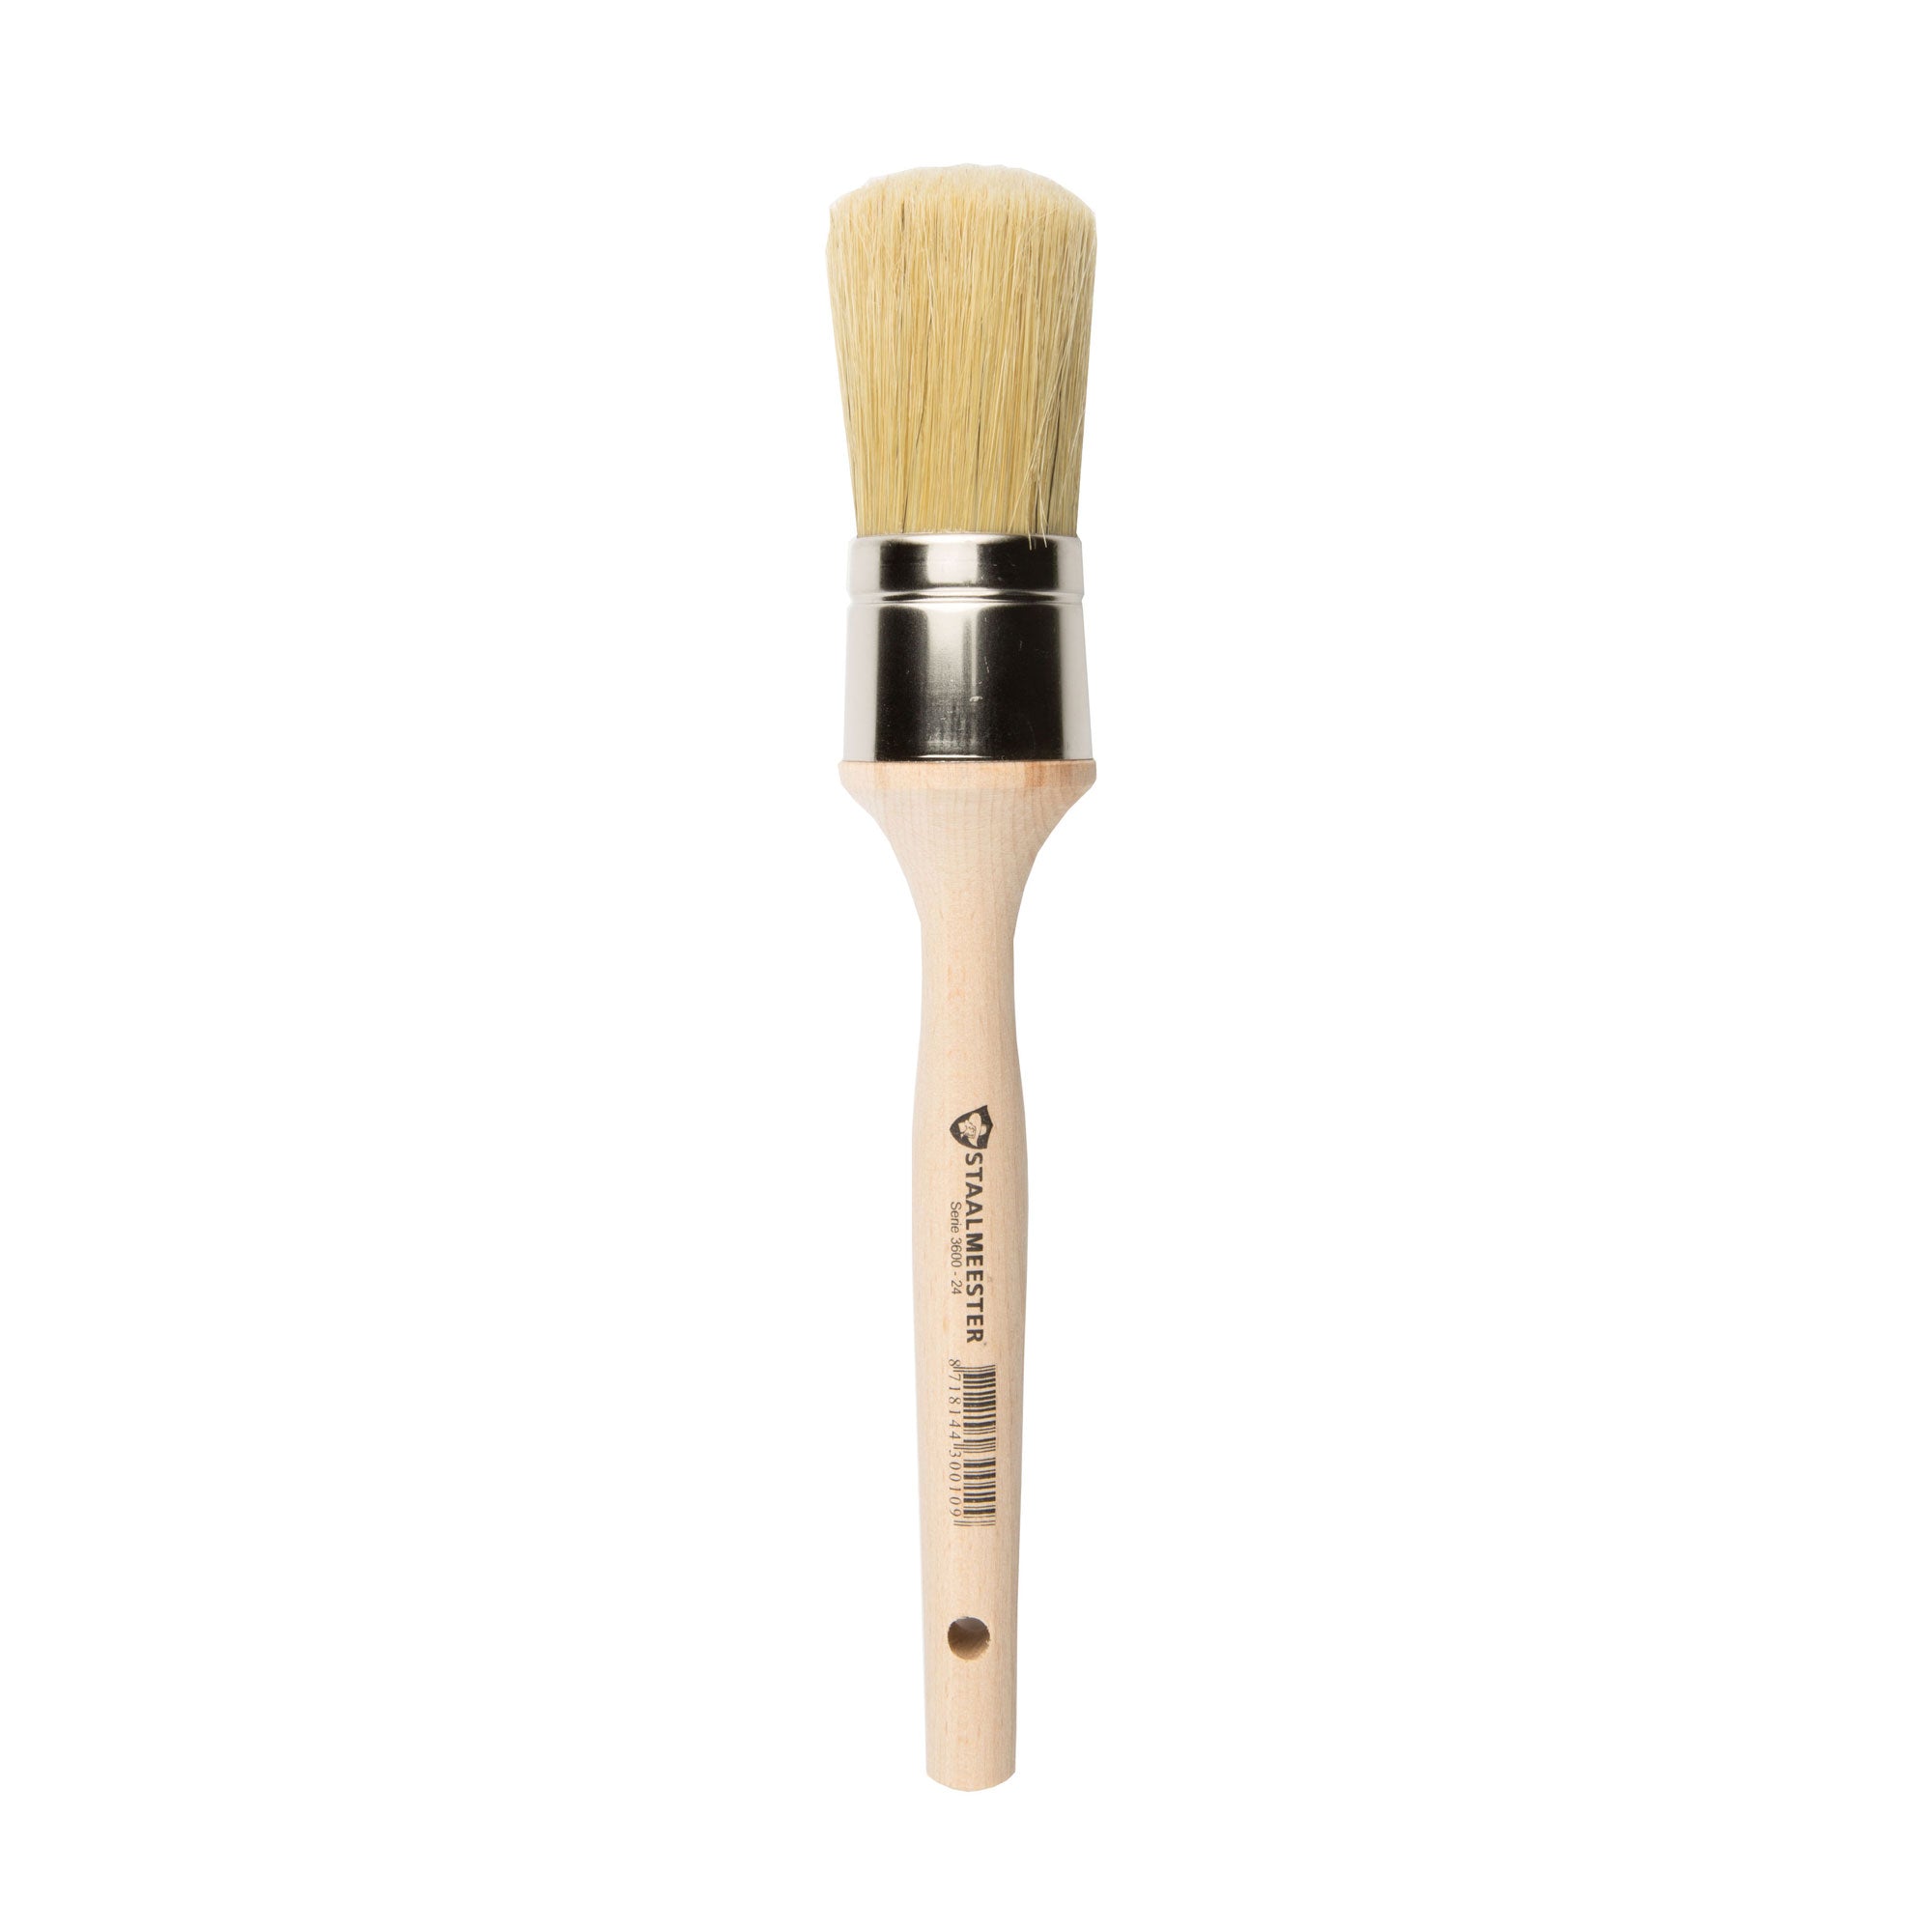 Fusion_Mineral_Paint_Staalmeester_24_Round_Natural_Fiber_Brush.jpg